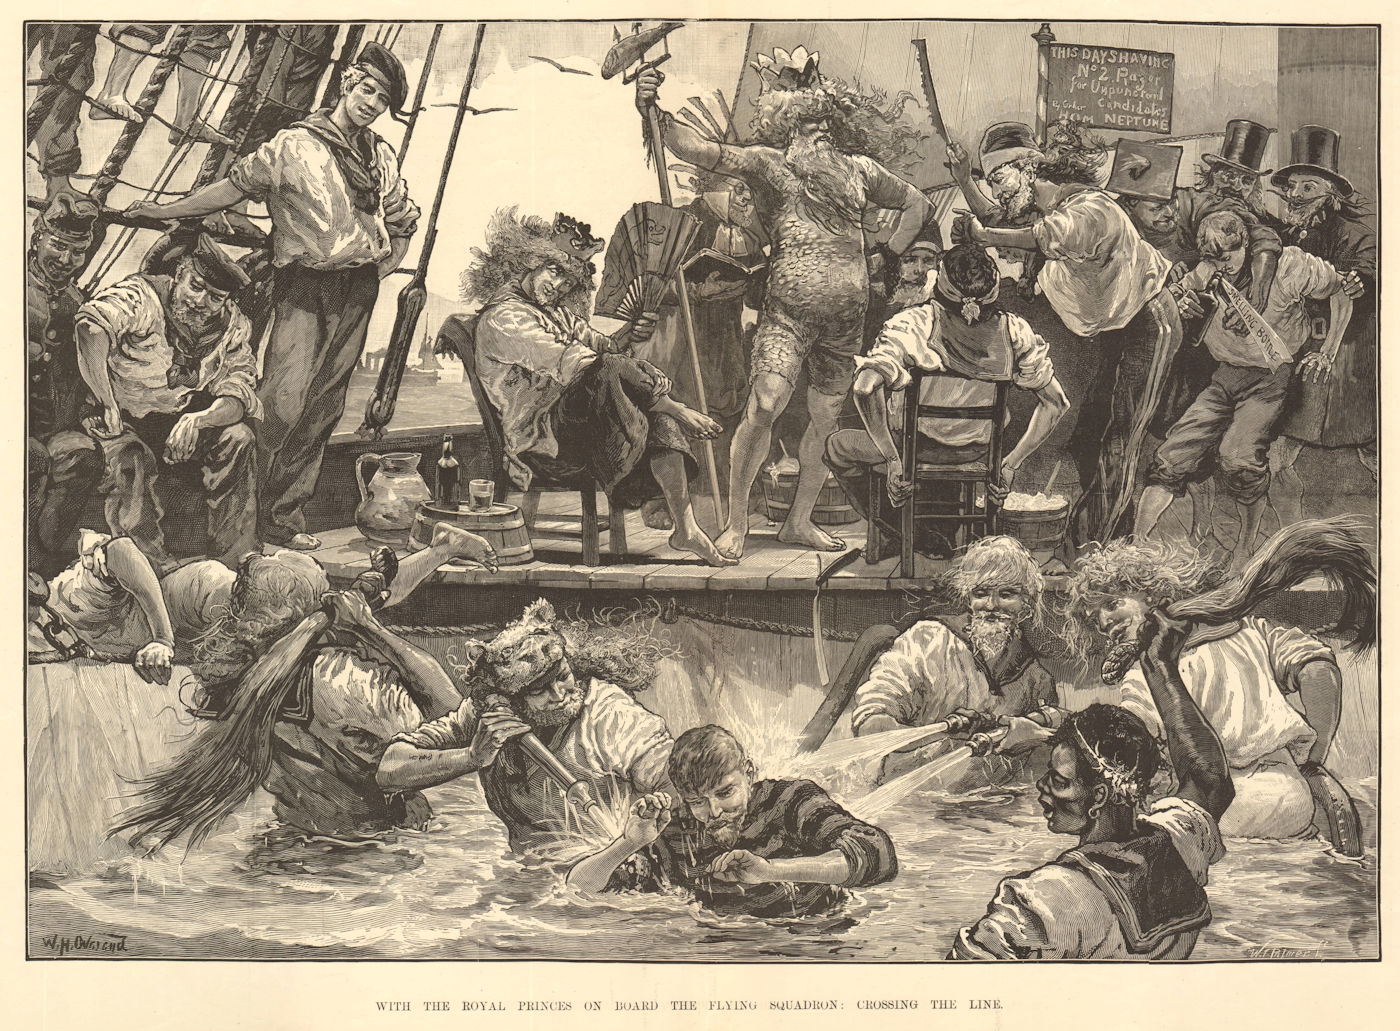 The royal princes on board the Flying Squadron: crossing the line 1881 print